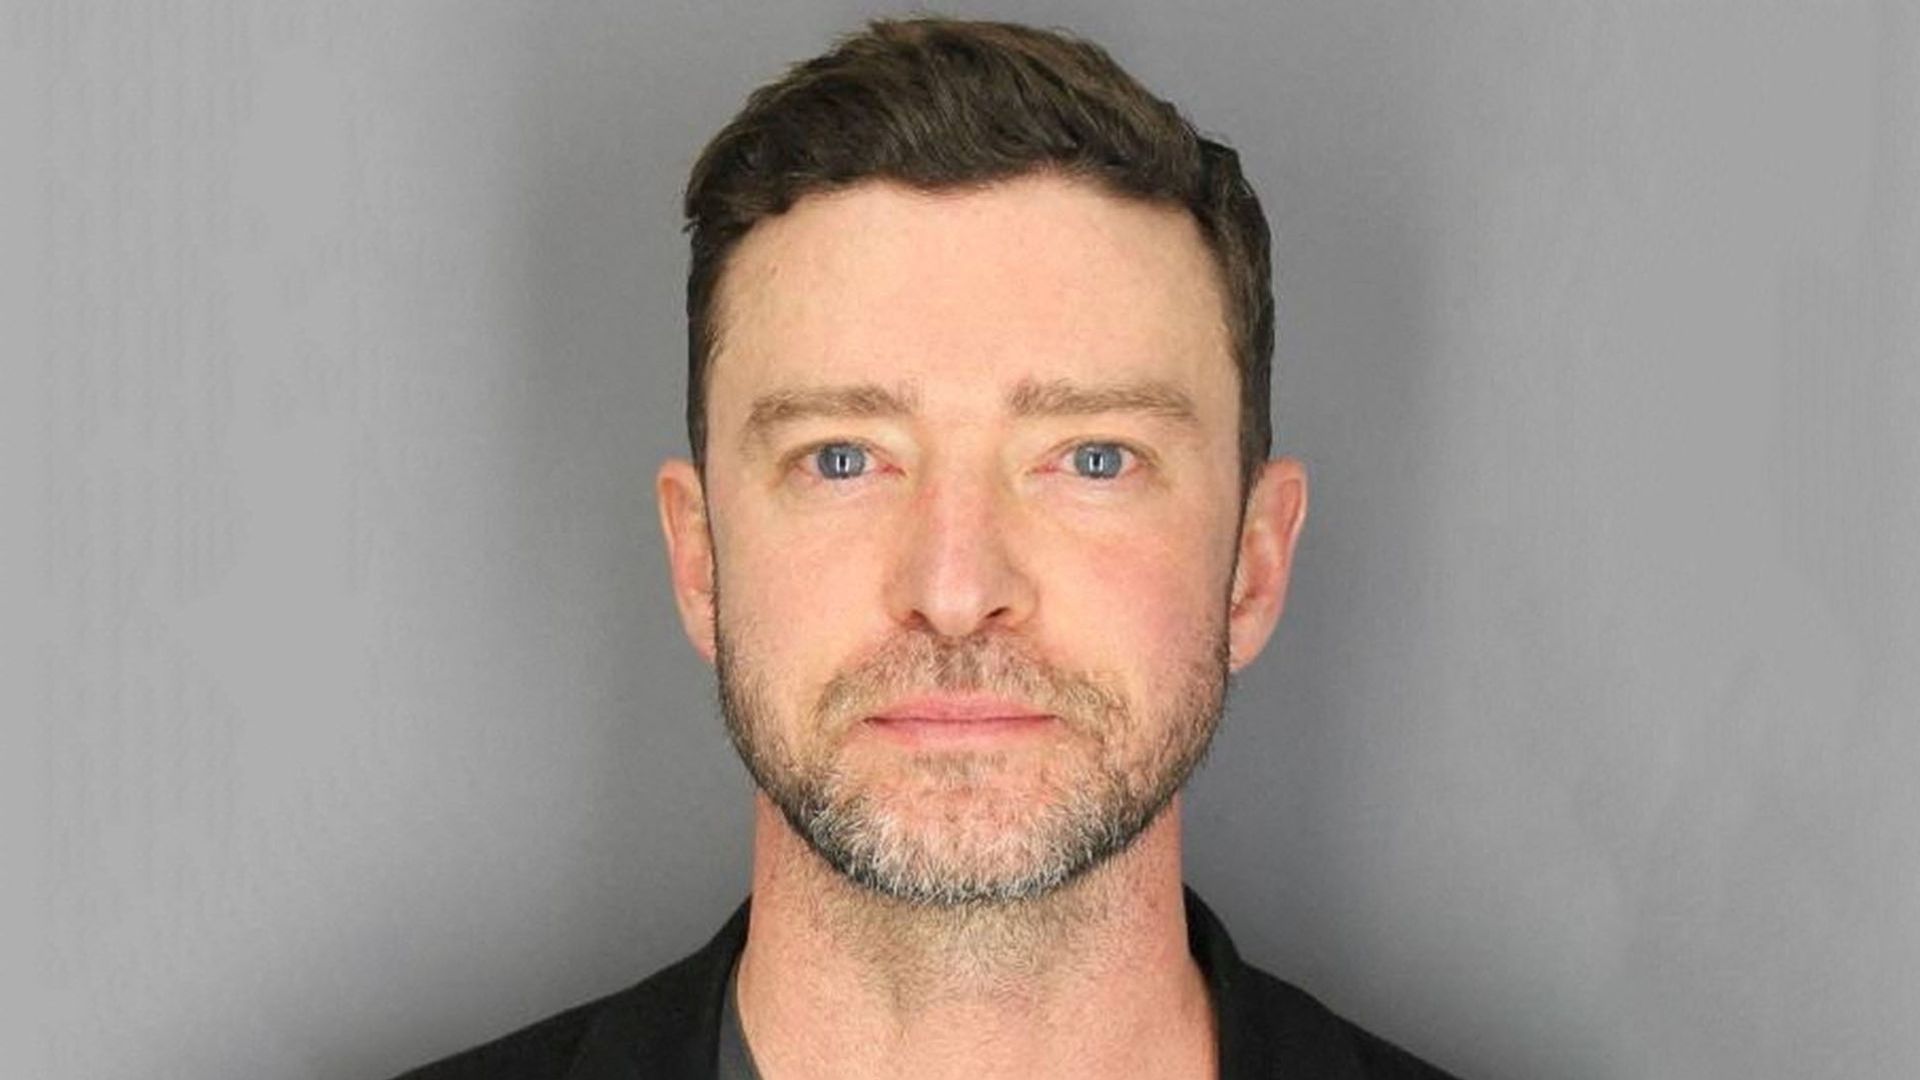 Justin Timberlake ‘was not intoxicated when arrested for drink-driving’